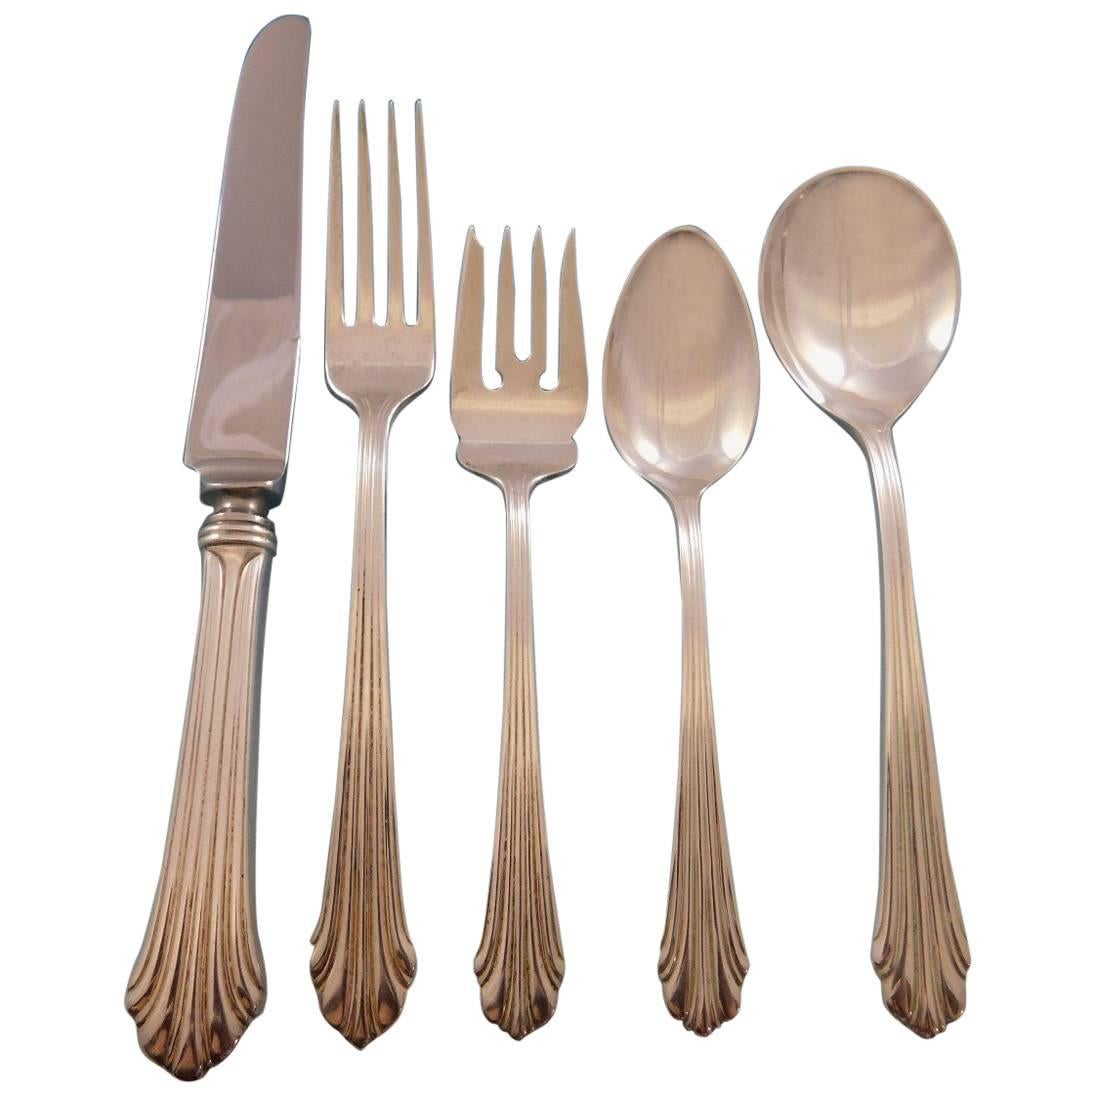 Homewood by Stieff Sterling Silver Flatware Set for 12 Service 60 pieces For Sale